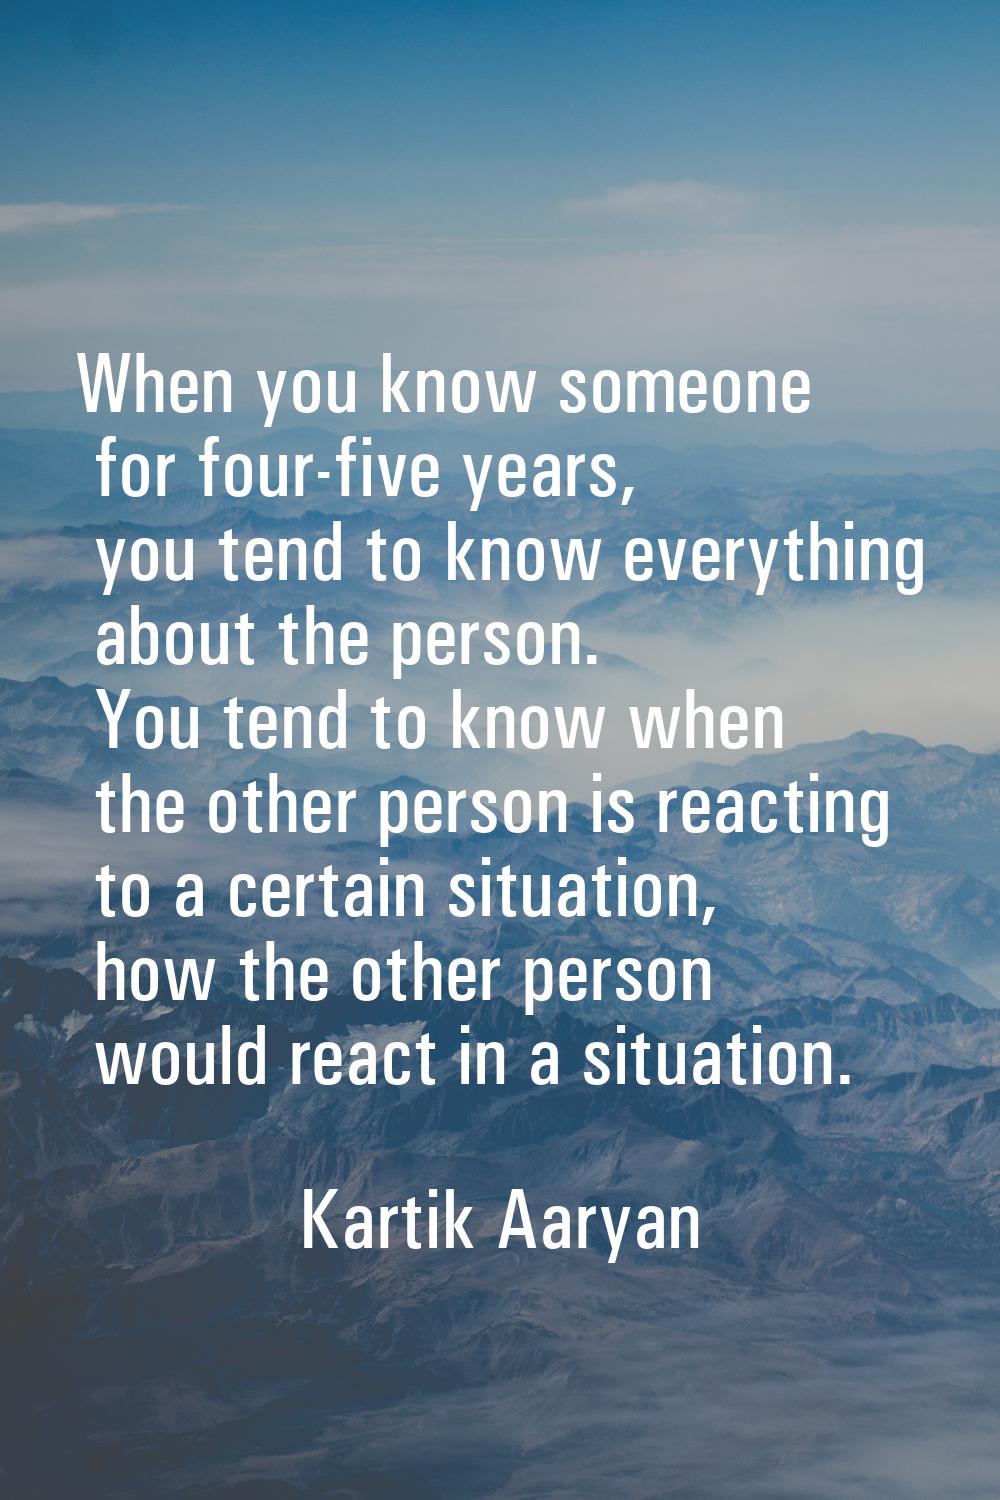 When you know someone for four-five years, you tend to know everything about the person. You tend t